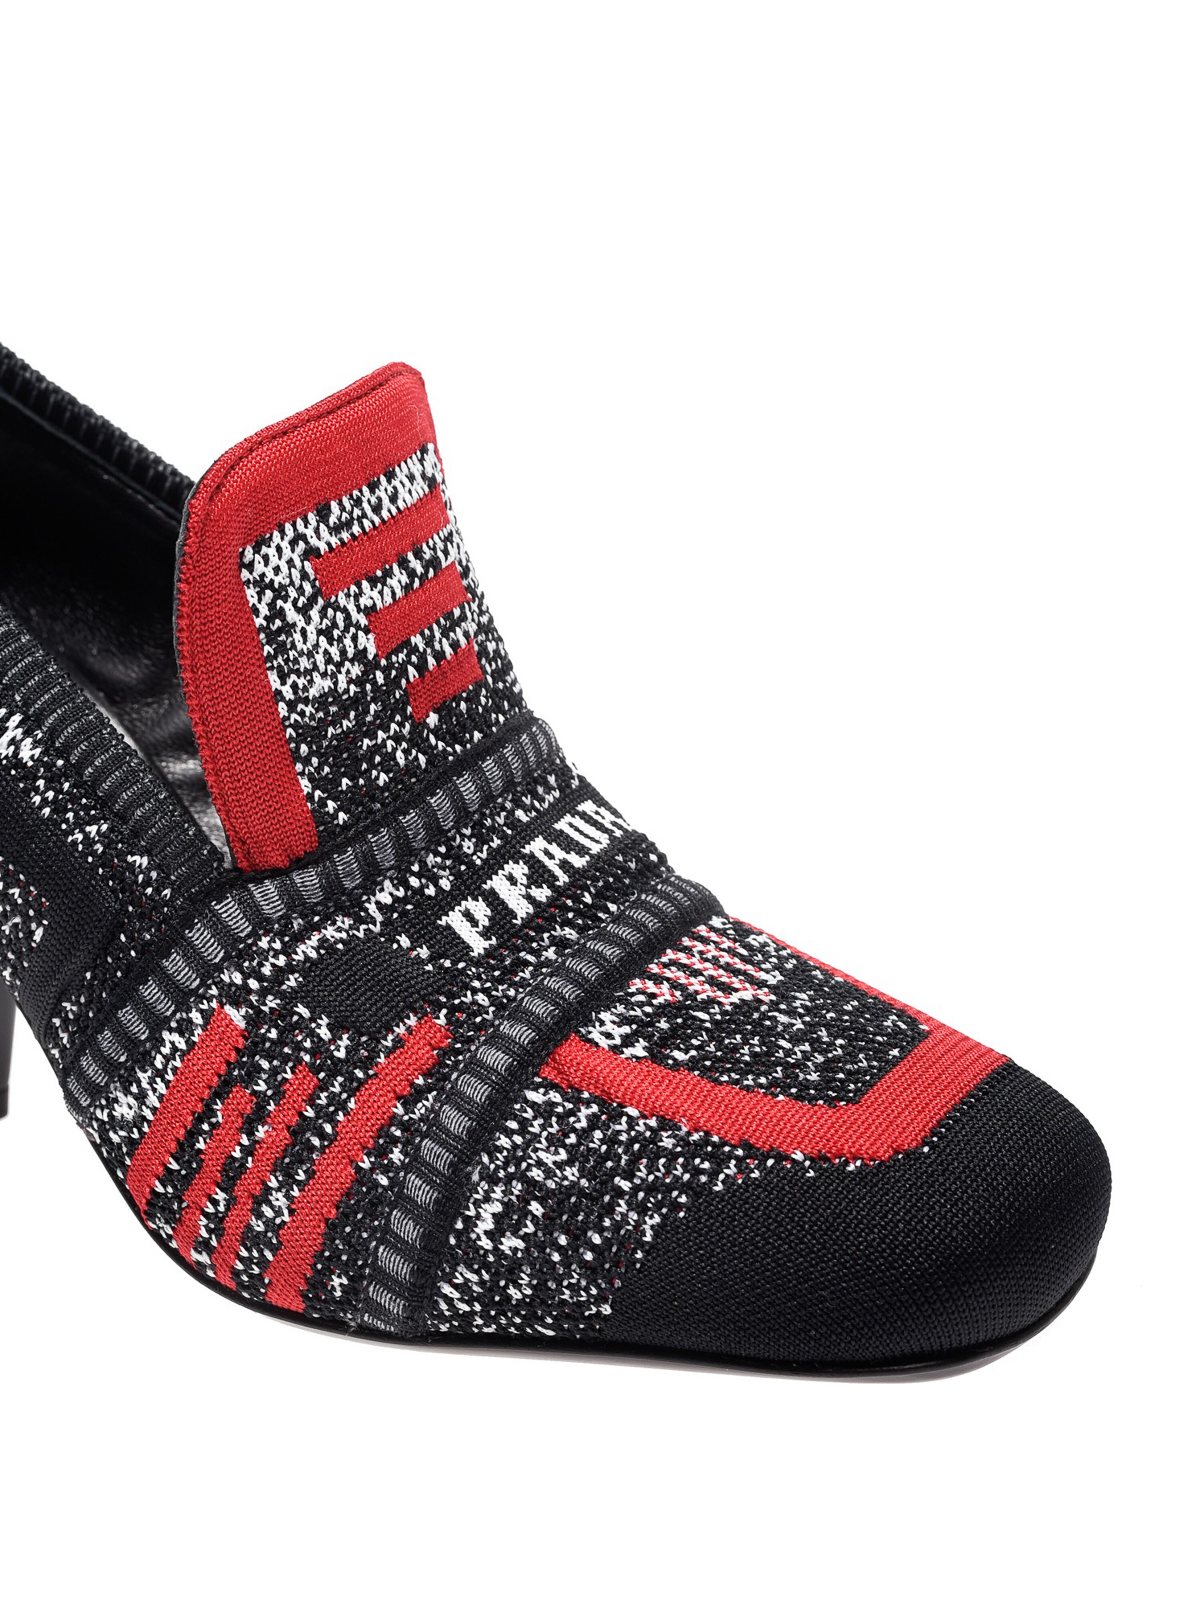 Prada - Jacquard knitted loafer style 